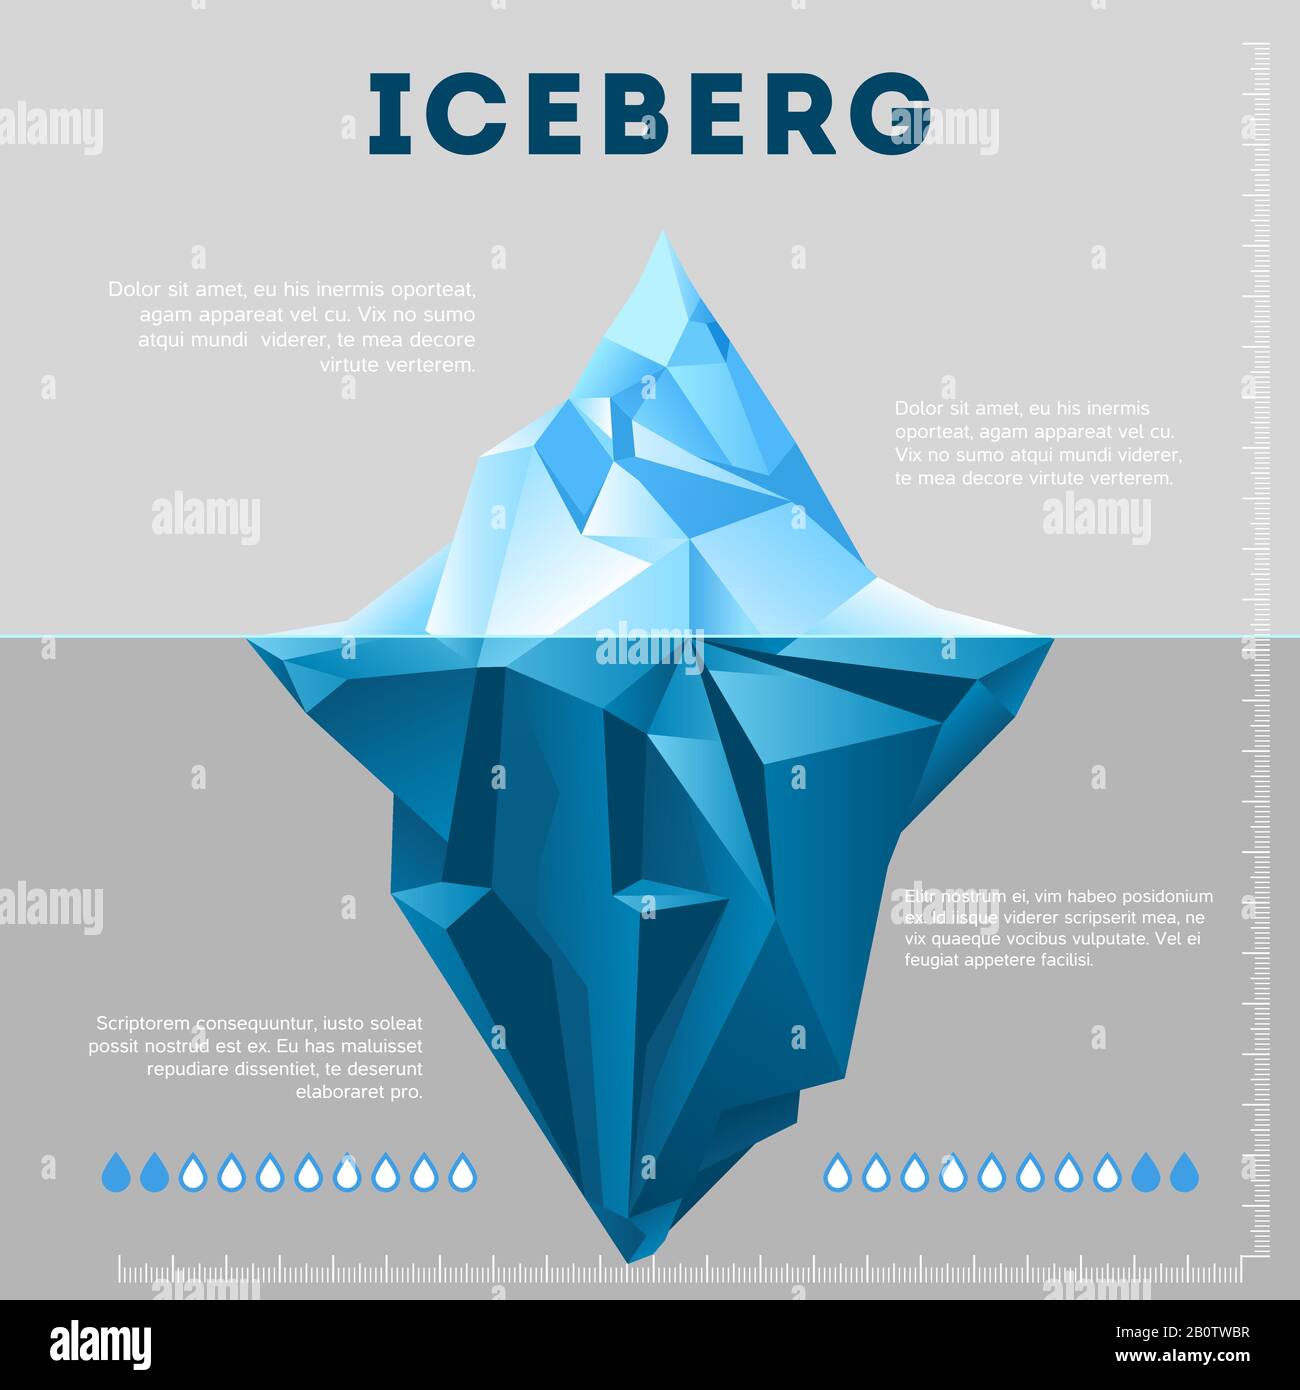 Information poster design with iceberg. Business chart ice, vector illustration Stock Vector